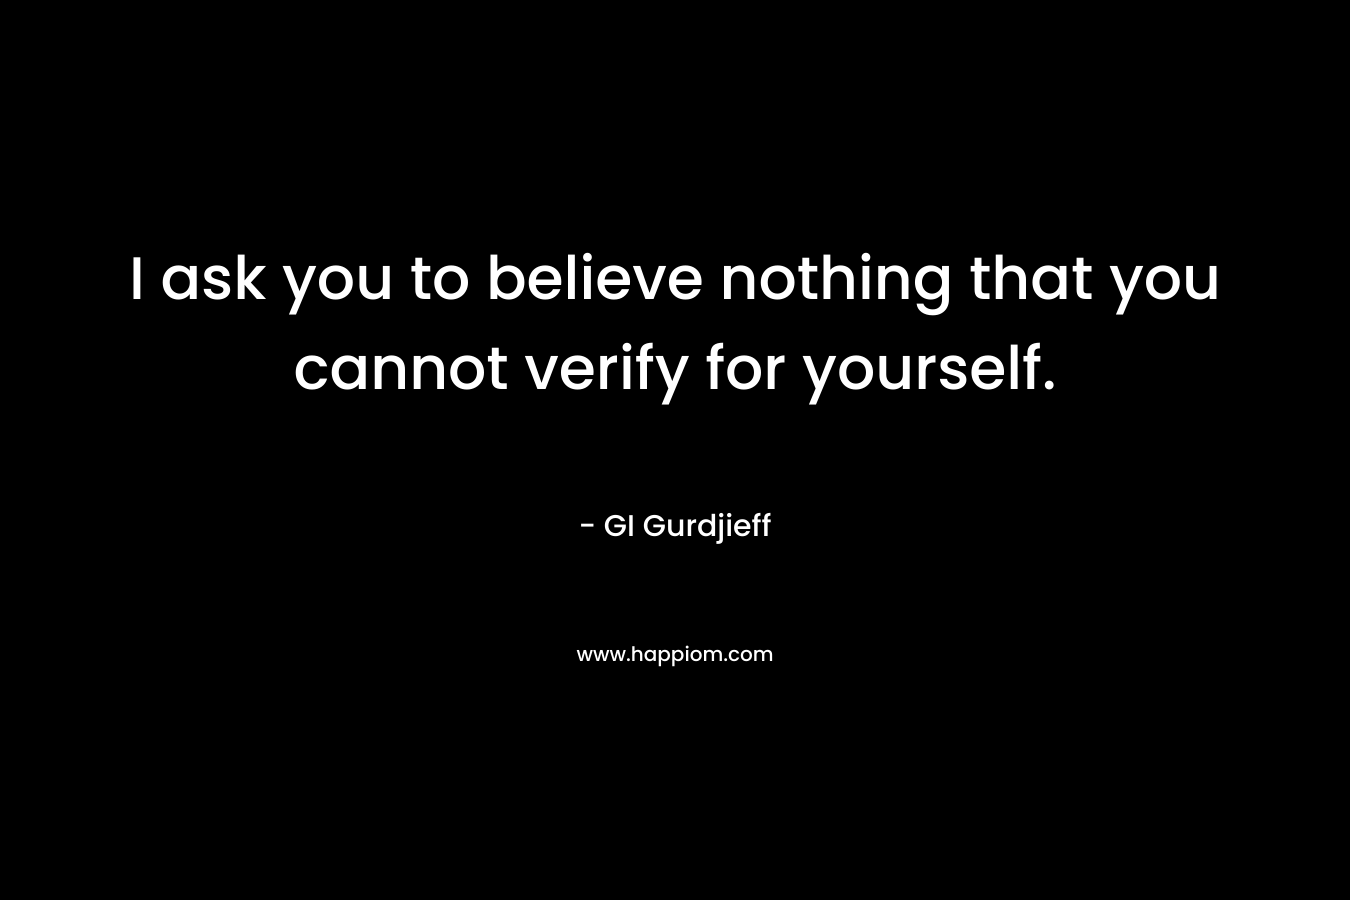 I ask you to believe nothing that you cannot verify for yourself.